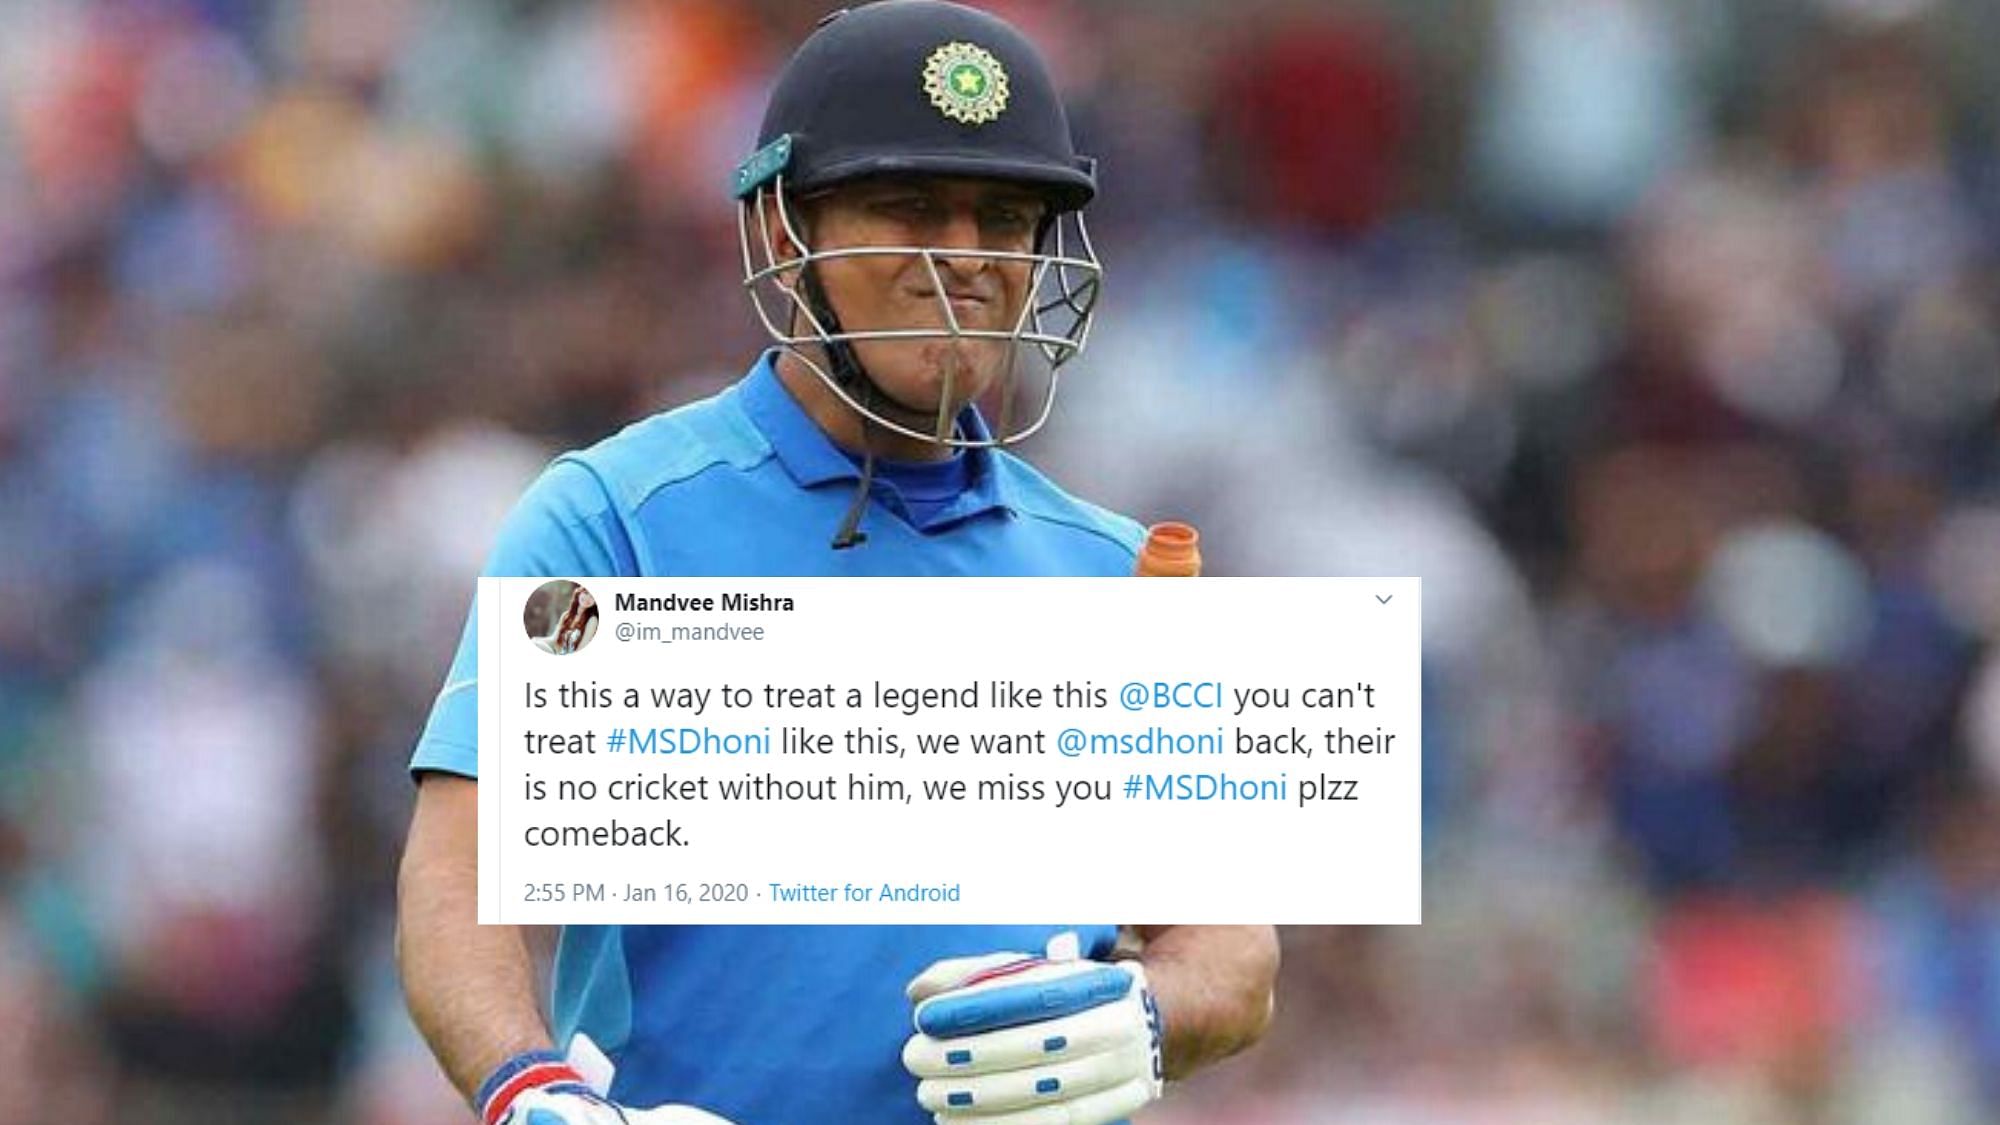 But his exclusion from the central contracts list didn’t go down well with the fans. The fans lashed out at the BCCI on social media.